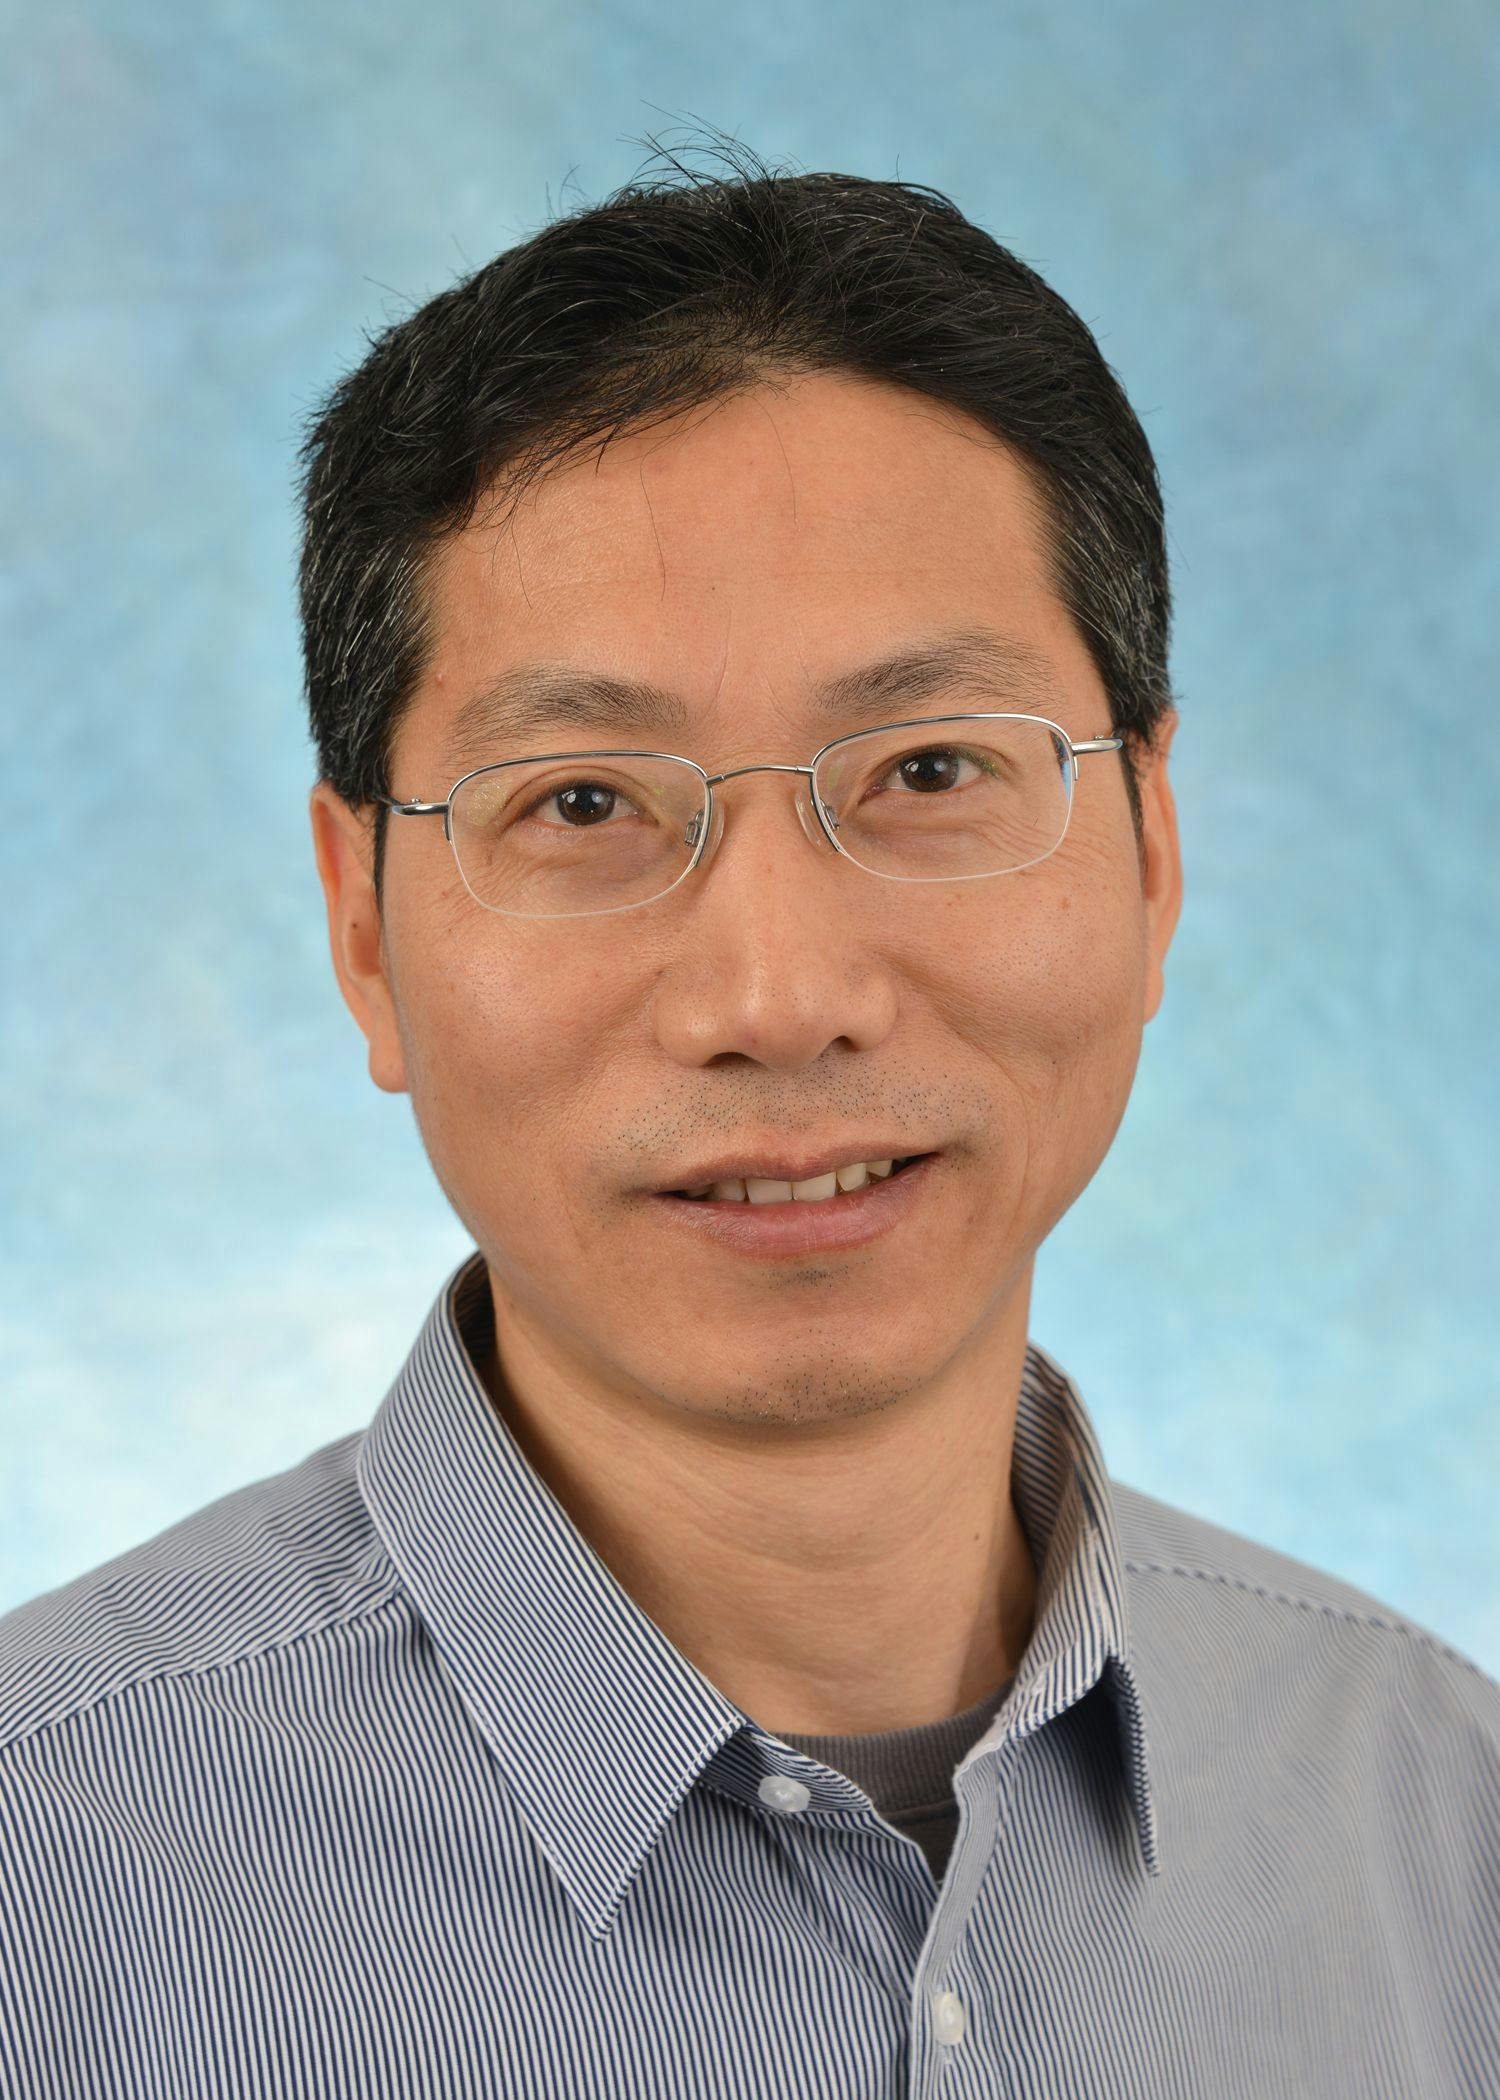 Guochin Jiang, Ph.D., of the University of North Carolina, and his colleagues found HIV in the microglia cells in the brain. 